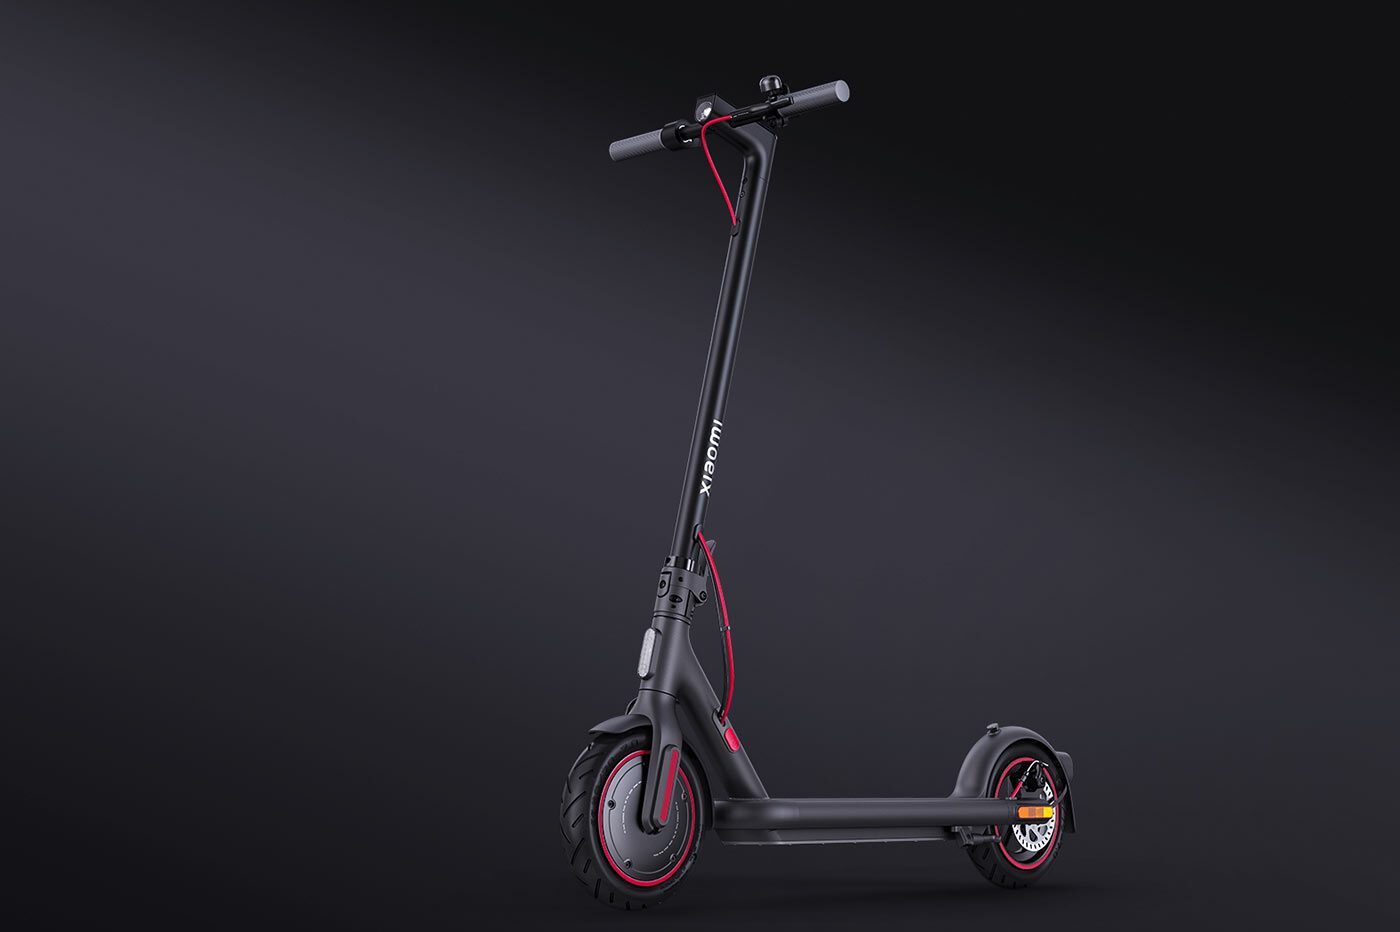 Chargeur Xiaomi Scooter Pro 4